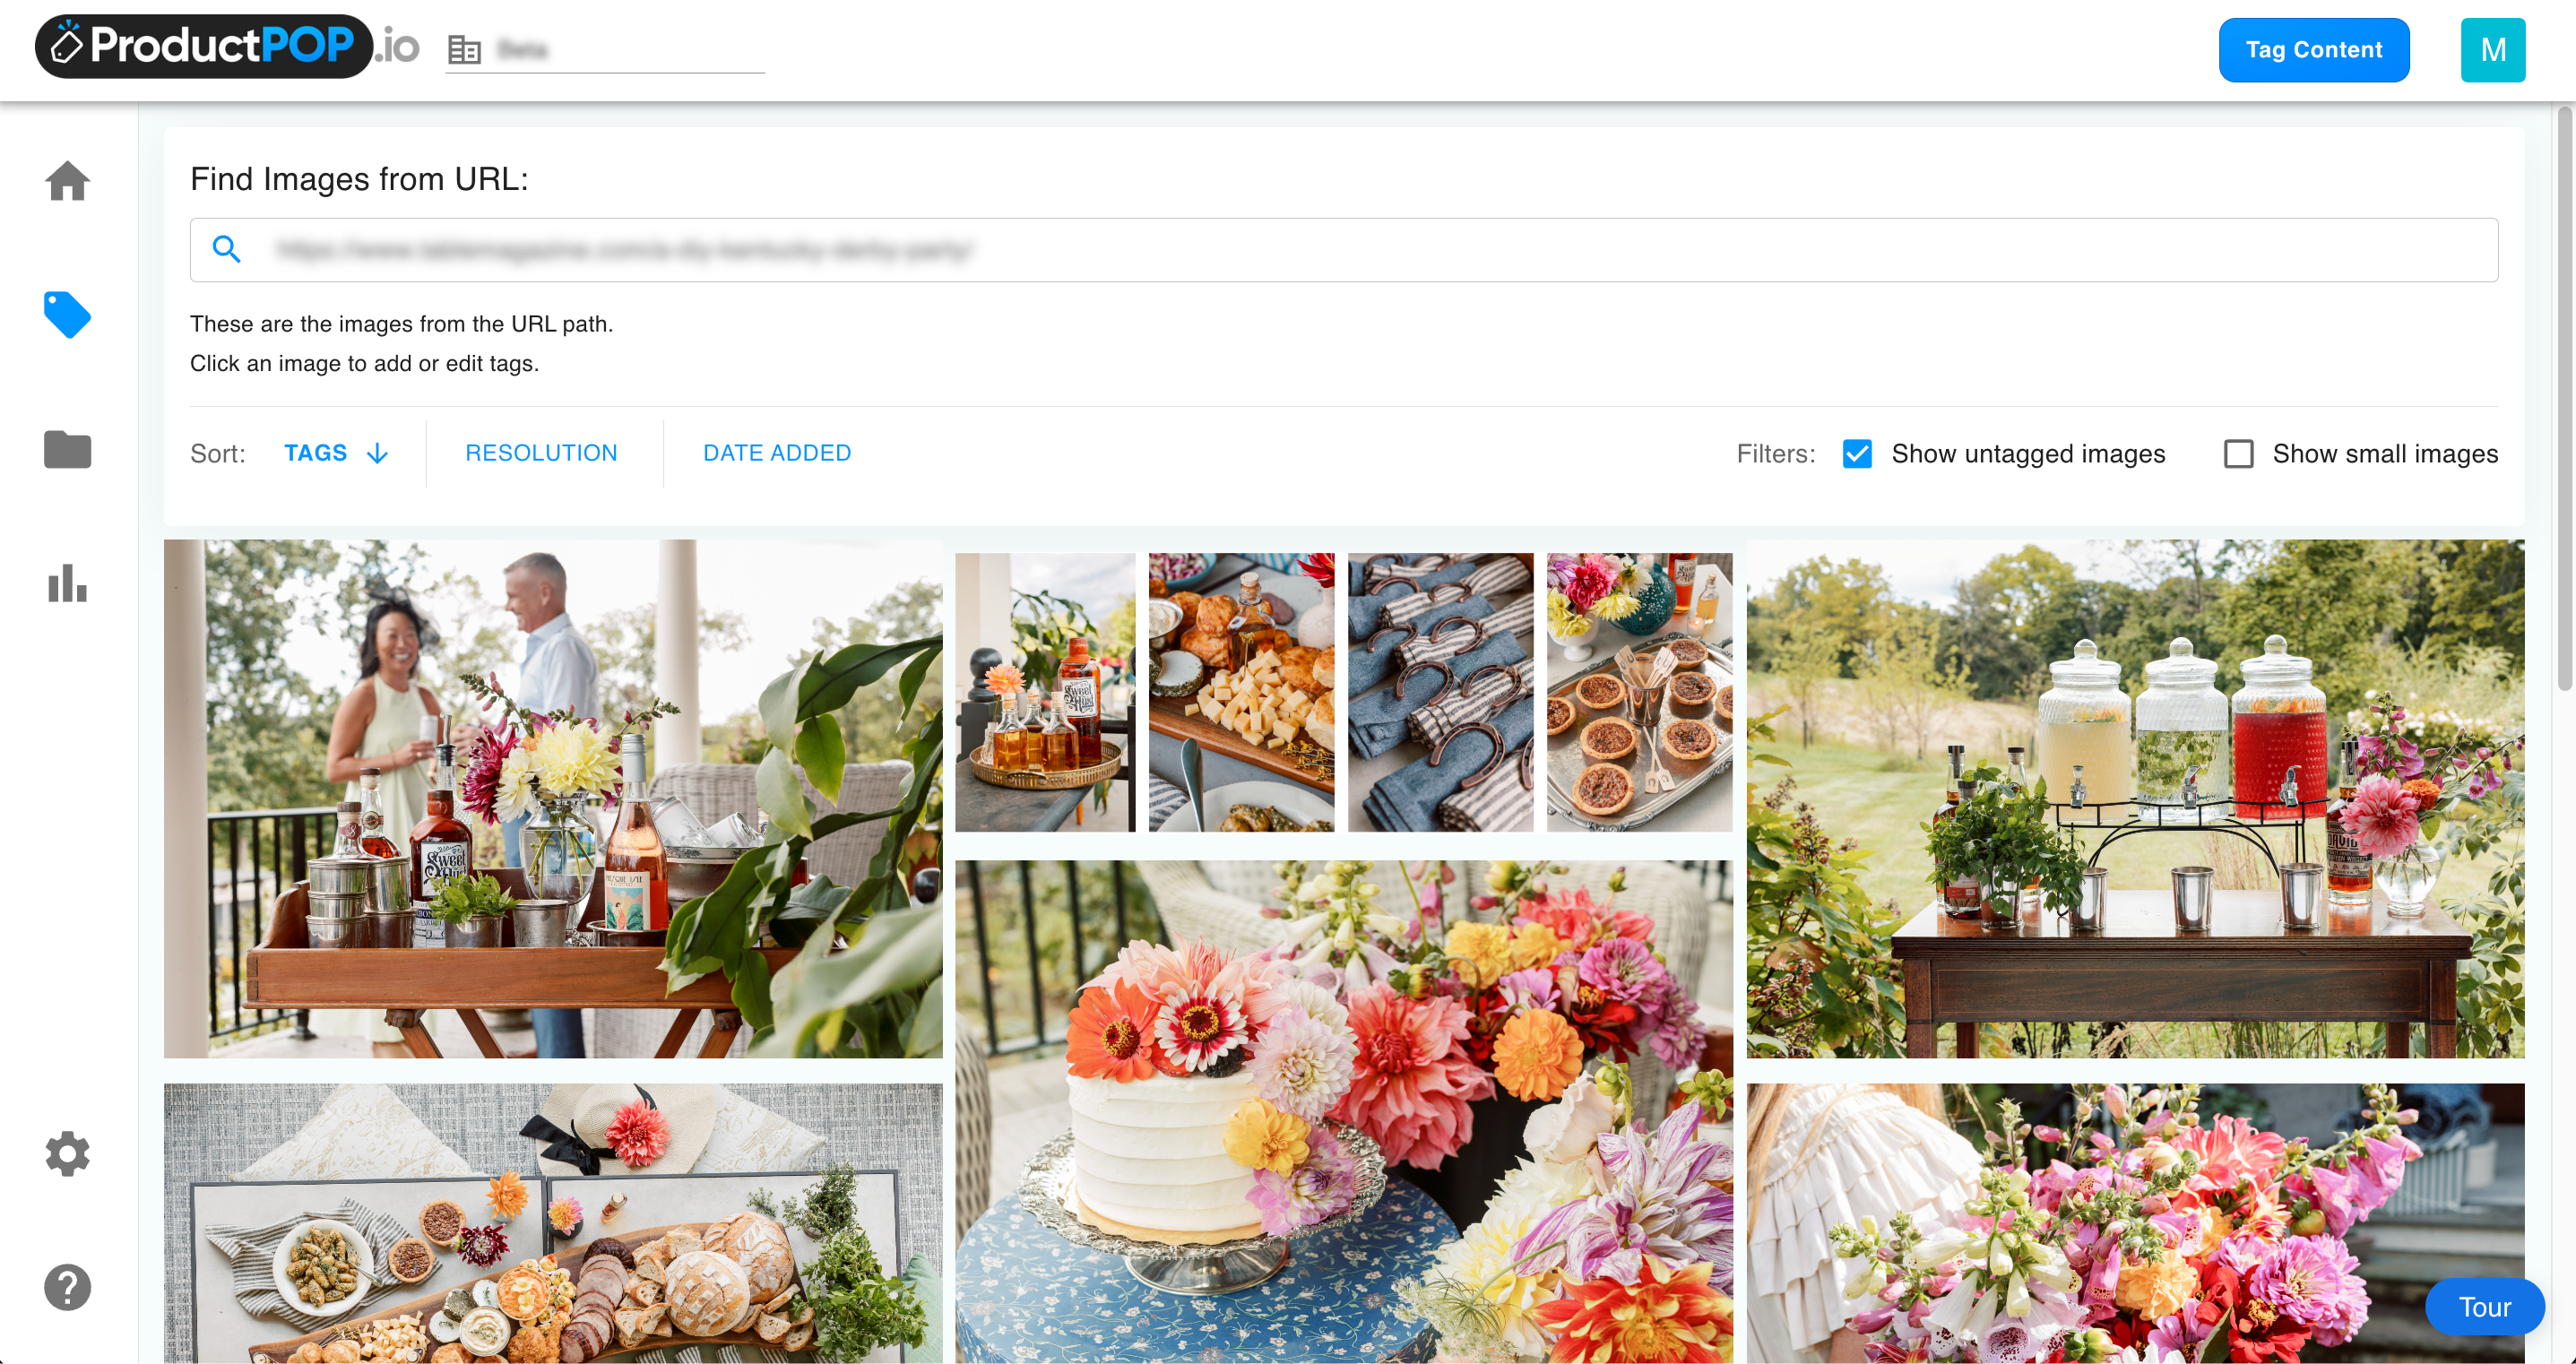 Easily select images by pasting in a page's URL and selecting the image you'll like to add shoppable product tags.